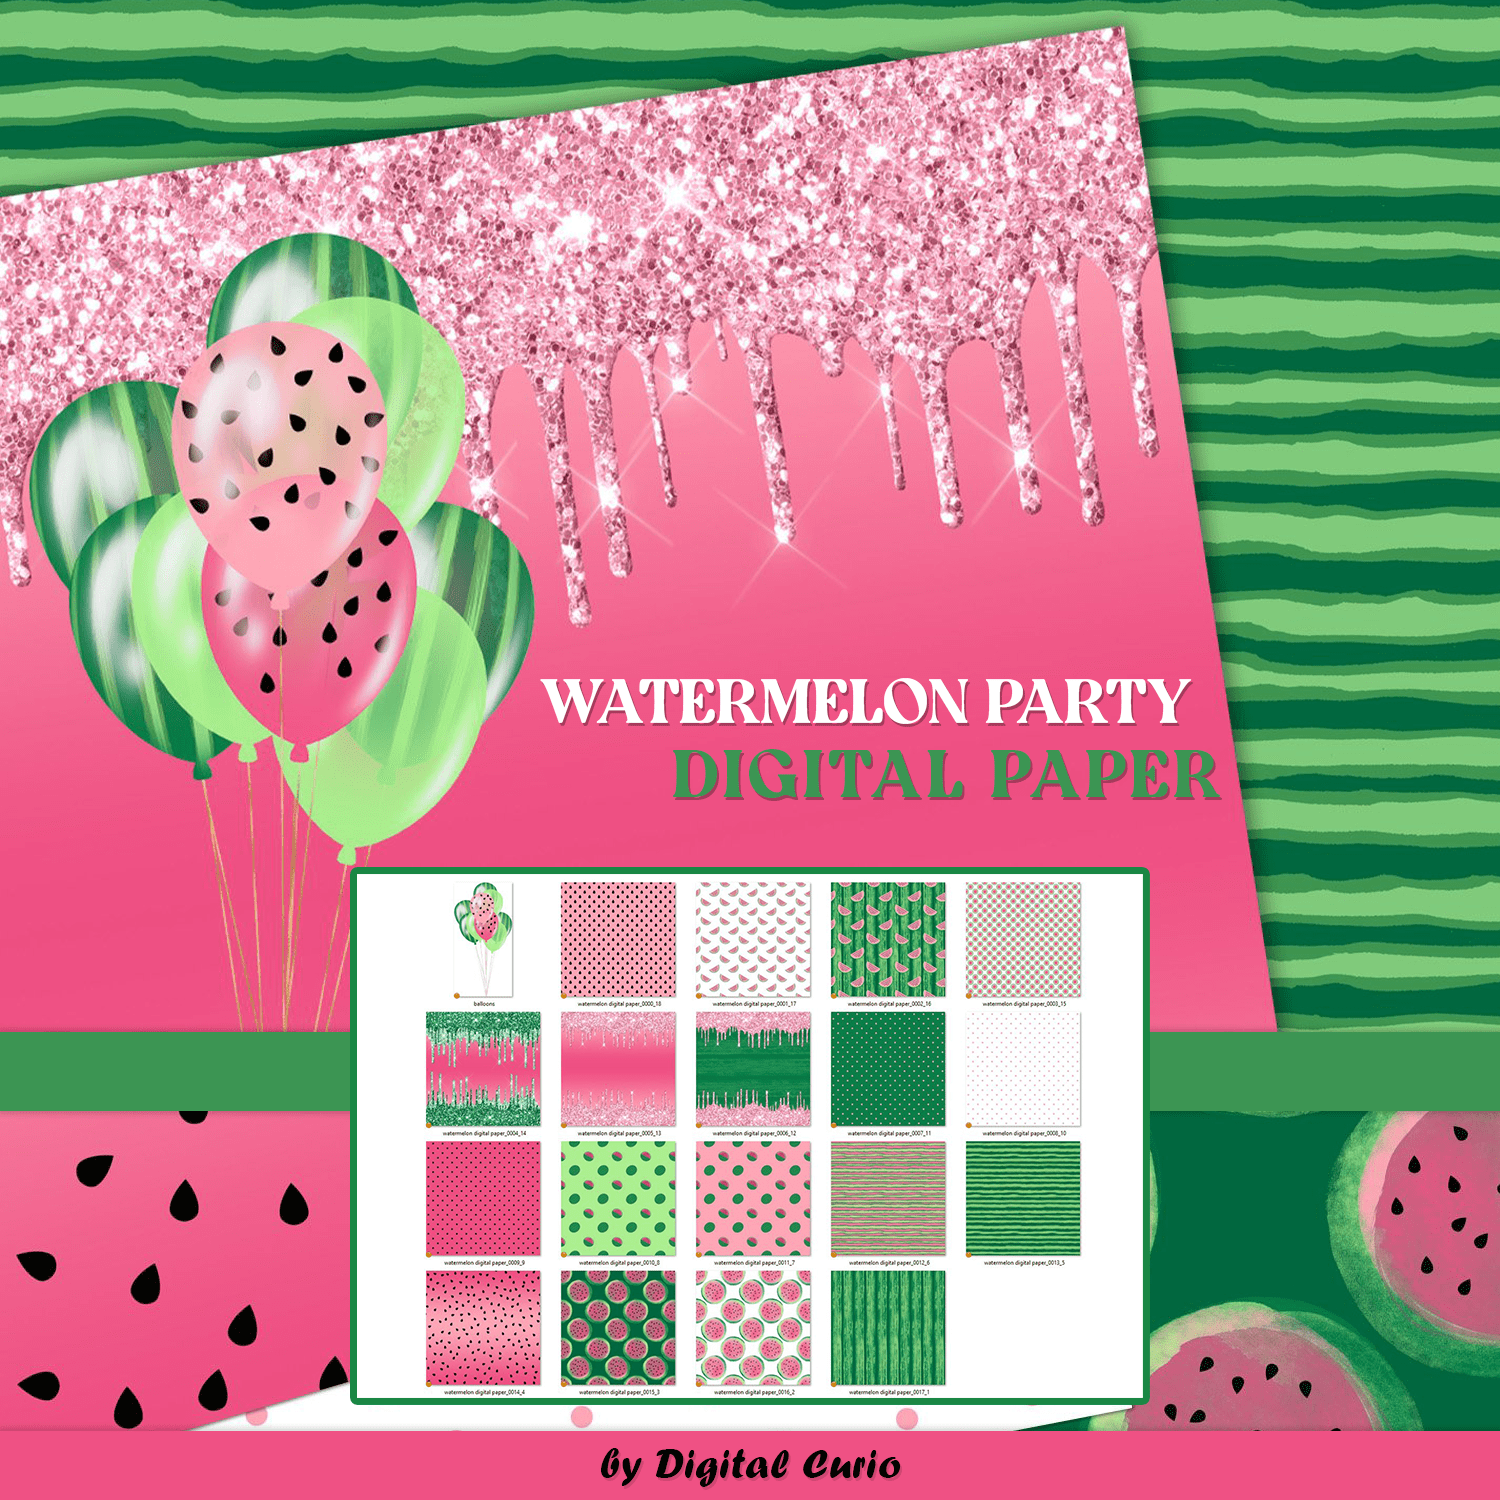 Watermelon party digital paper created by Digital Curio.